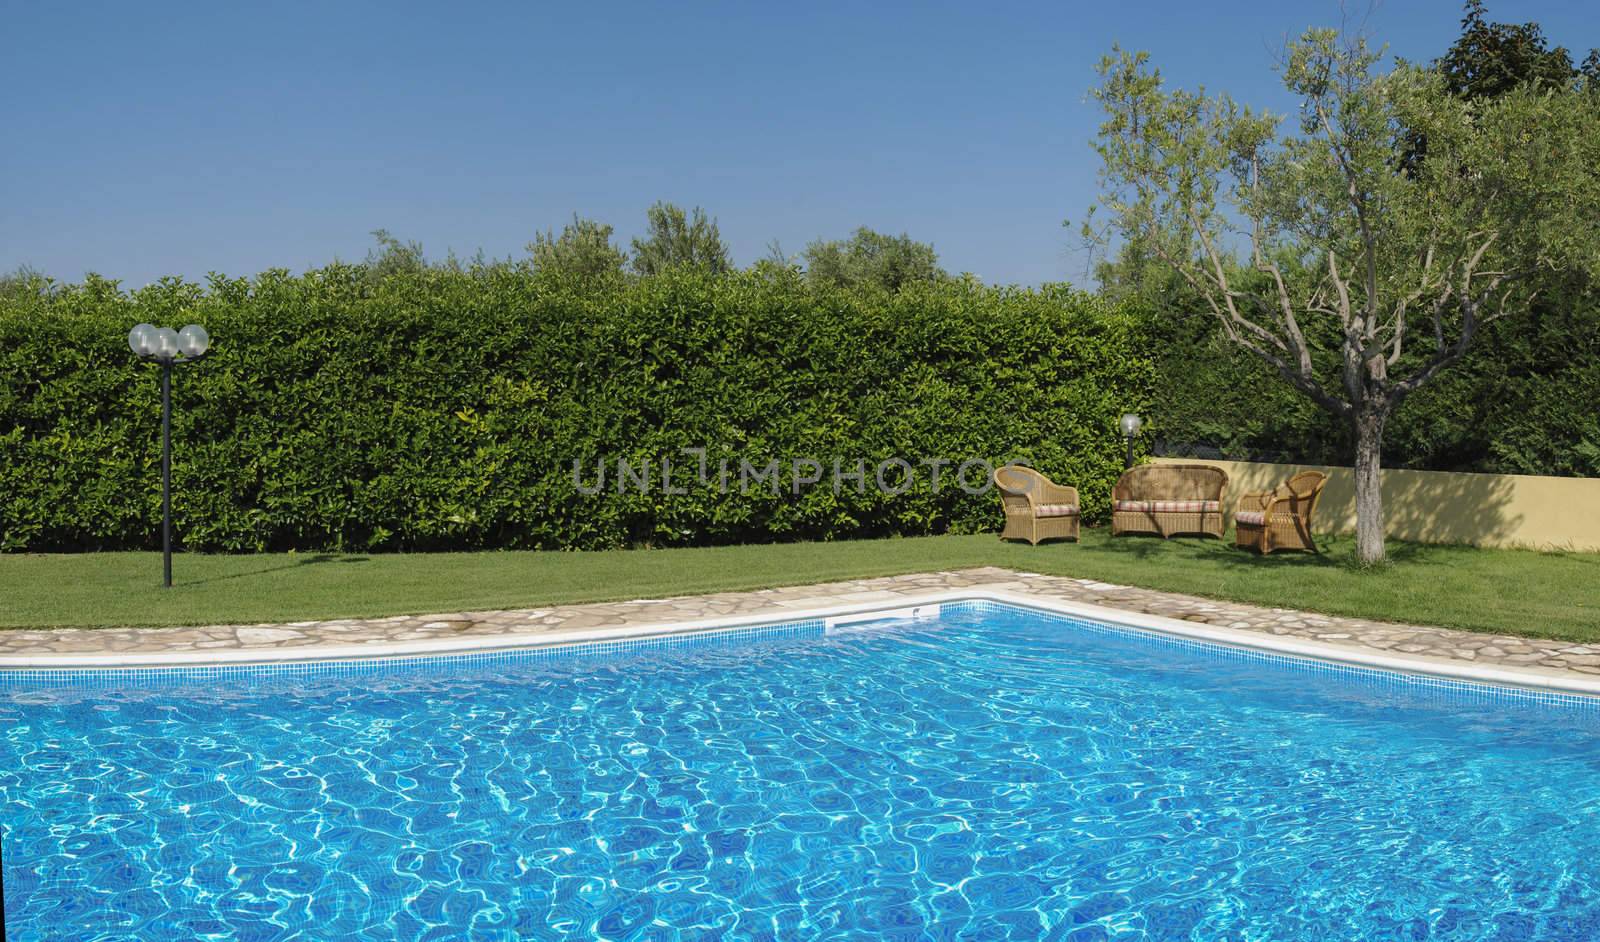 Pool and garden by lillo